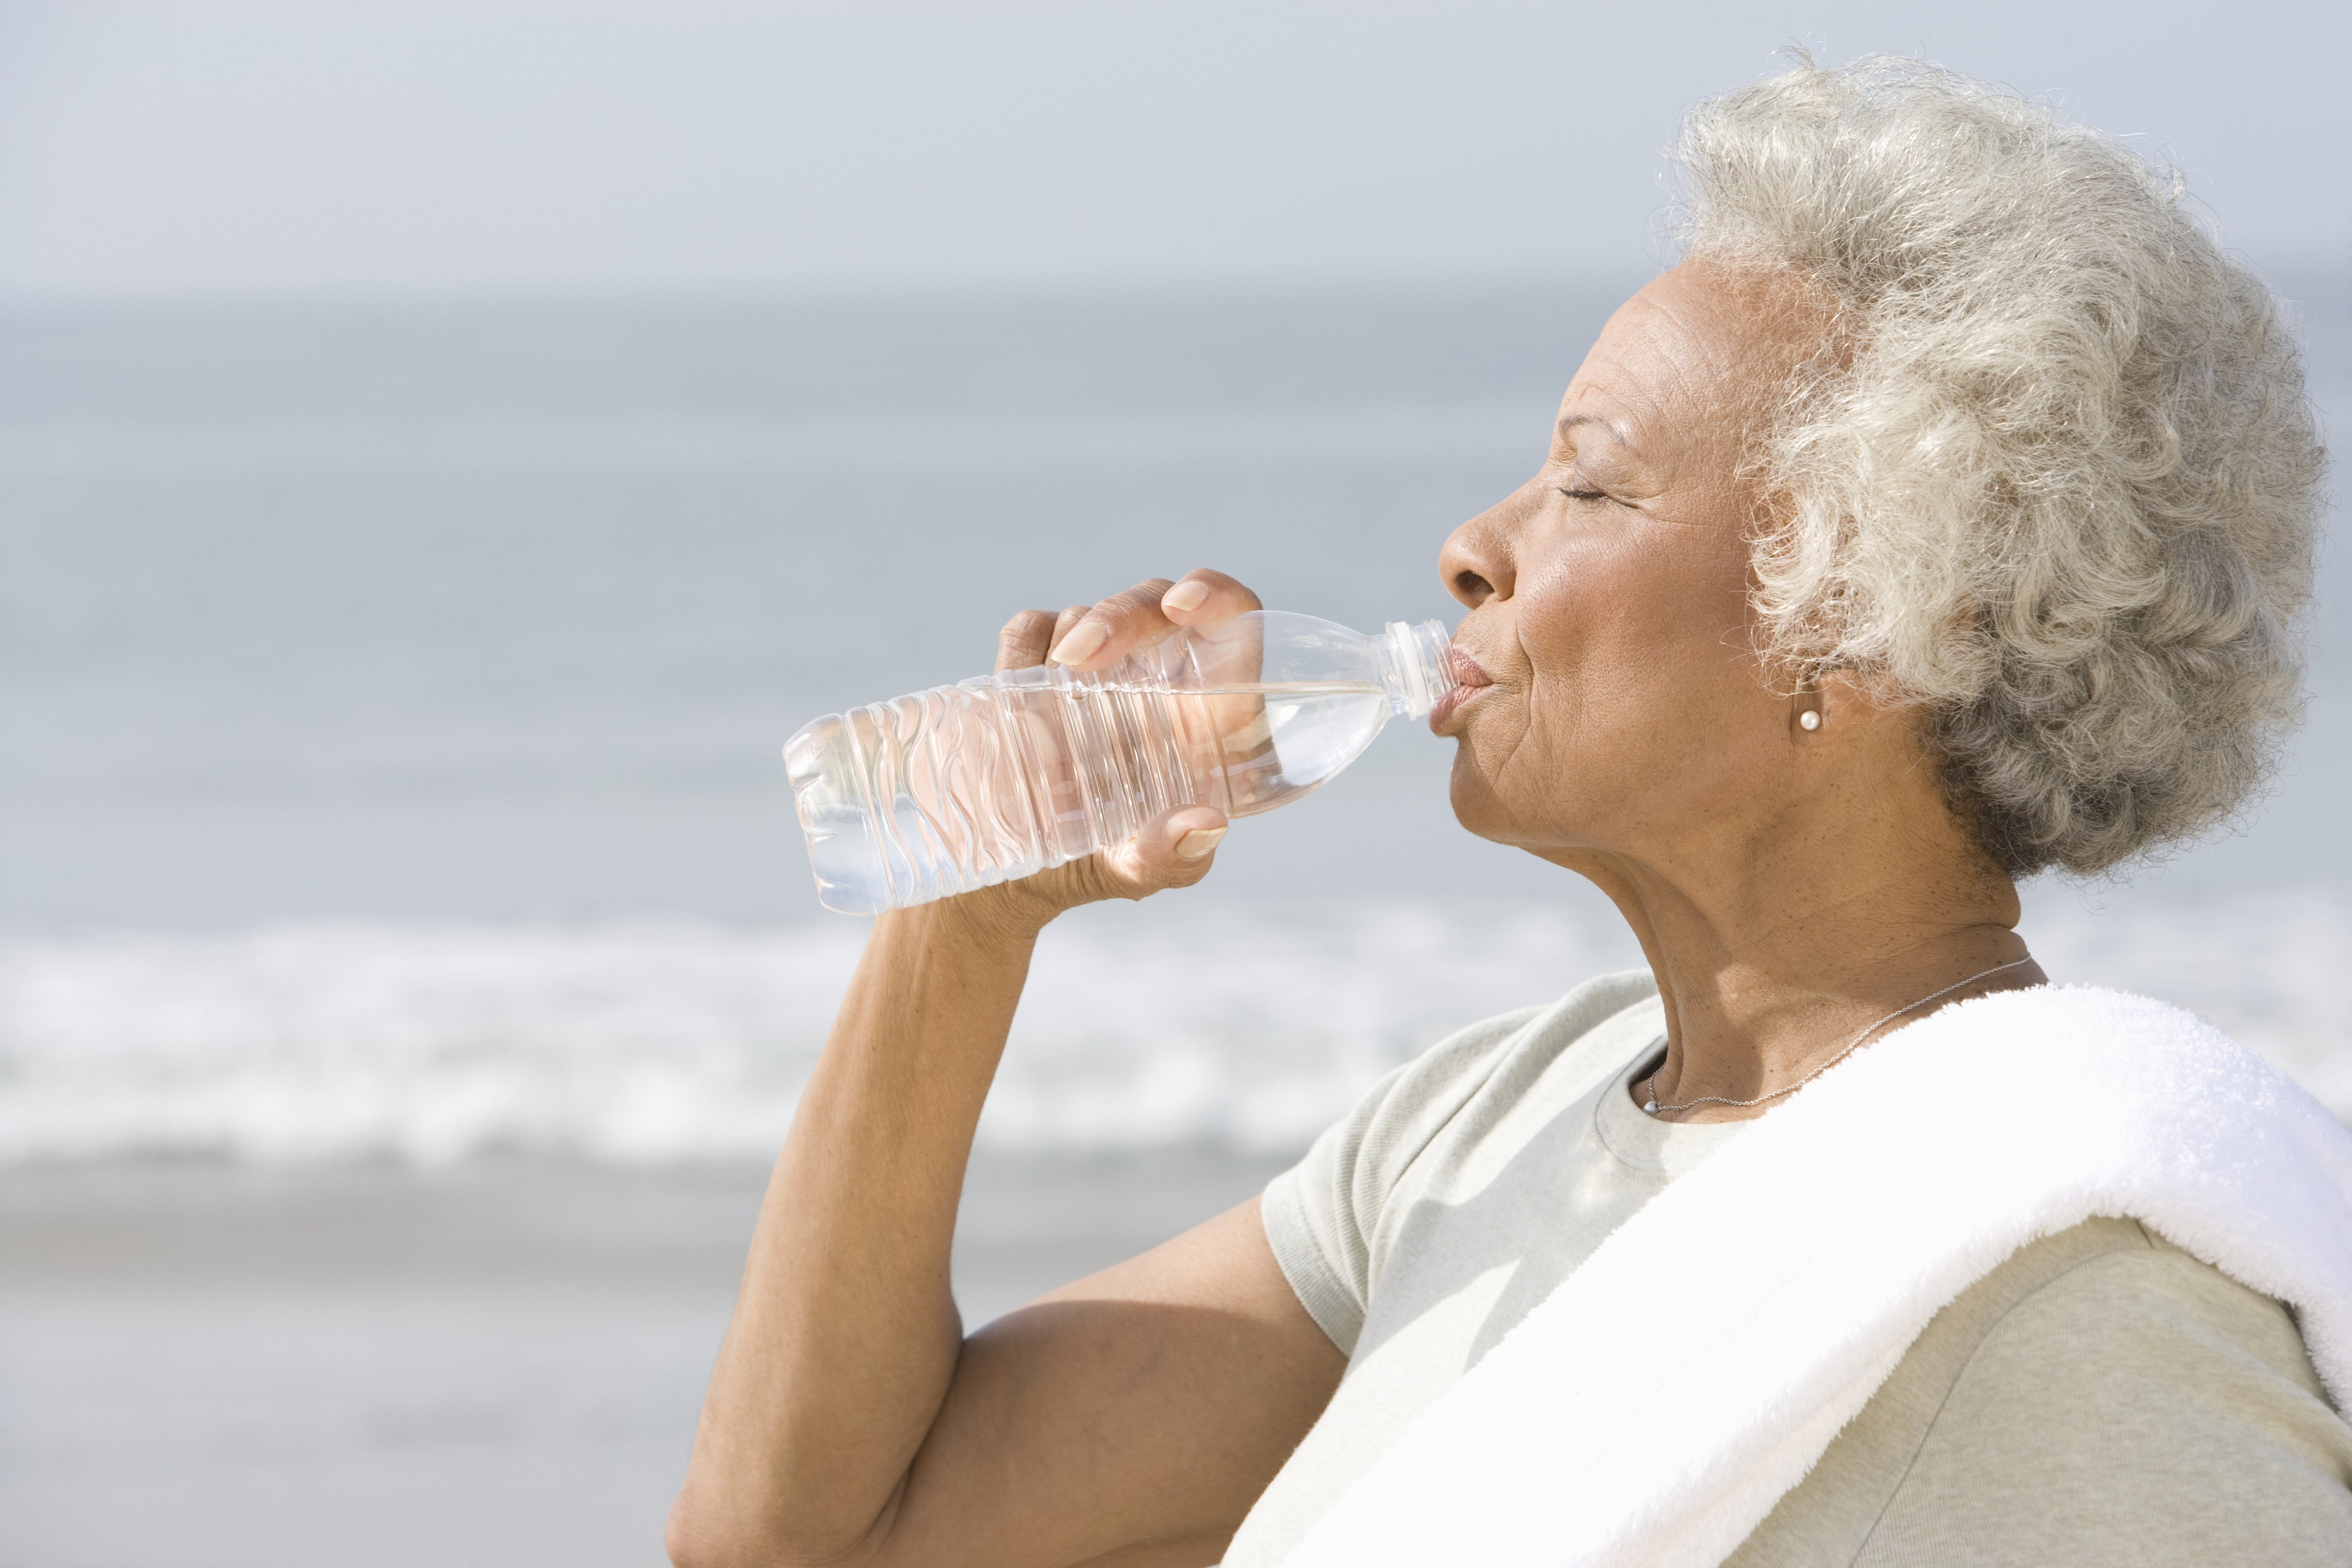 An older adult enjoying a cool drink from a water bottle